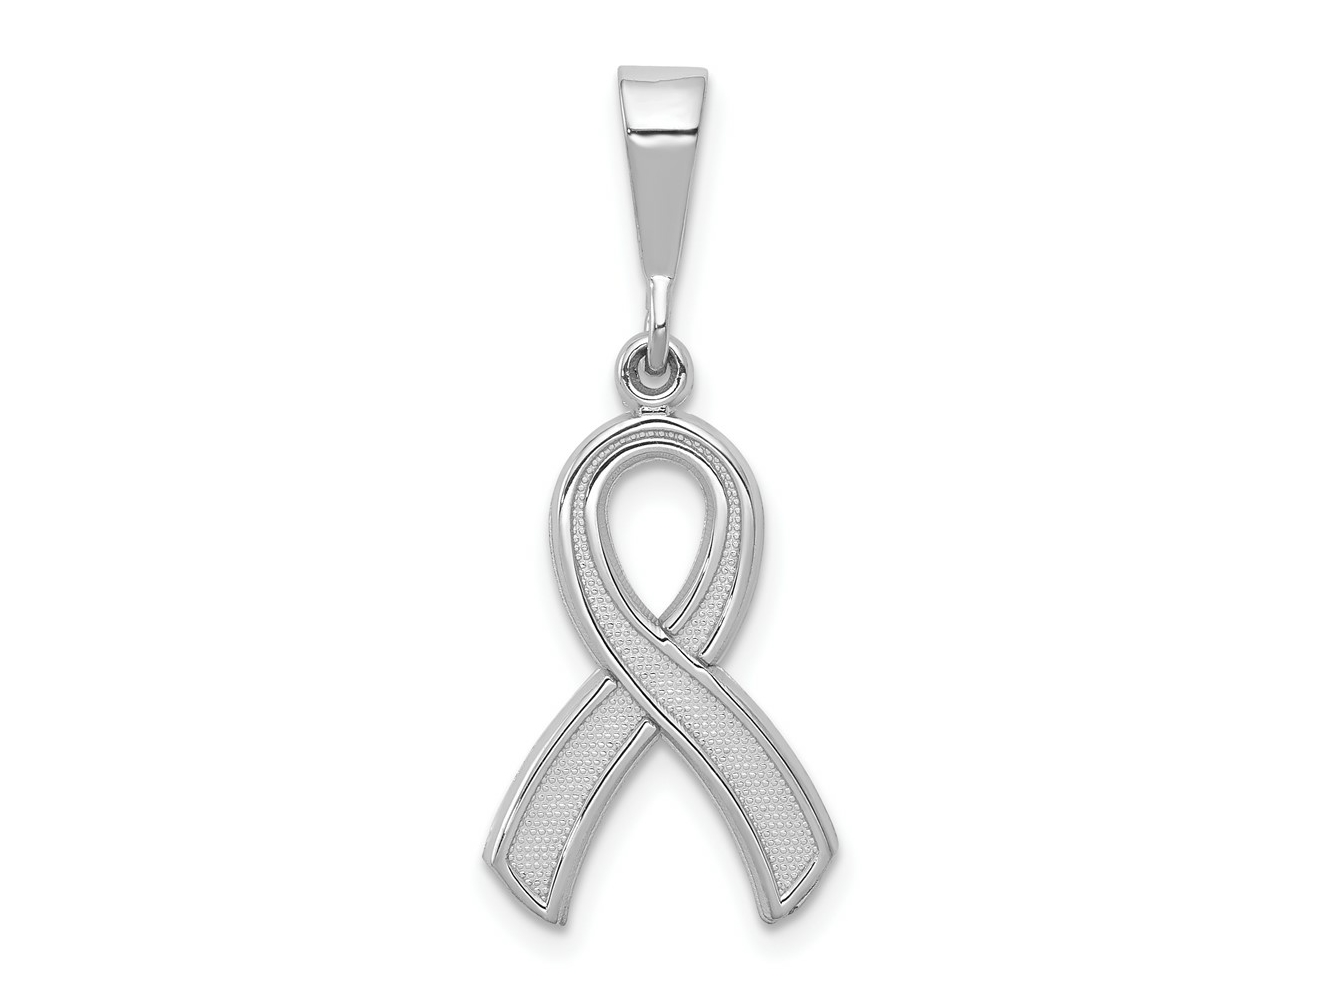 FJC Finejewelers 10 kt White Gold Themed Awareness Charm 30 mm x 12 mm